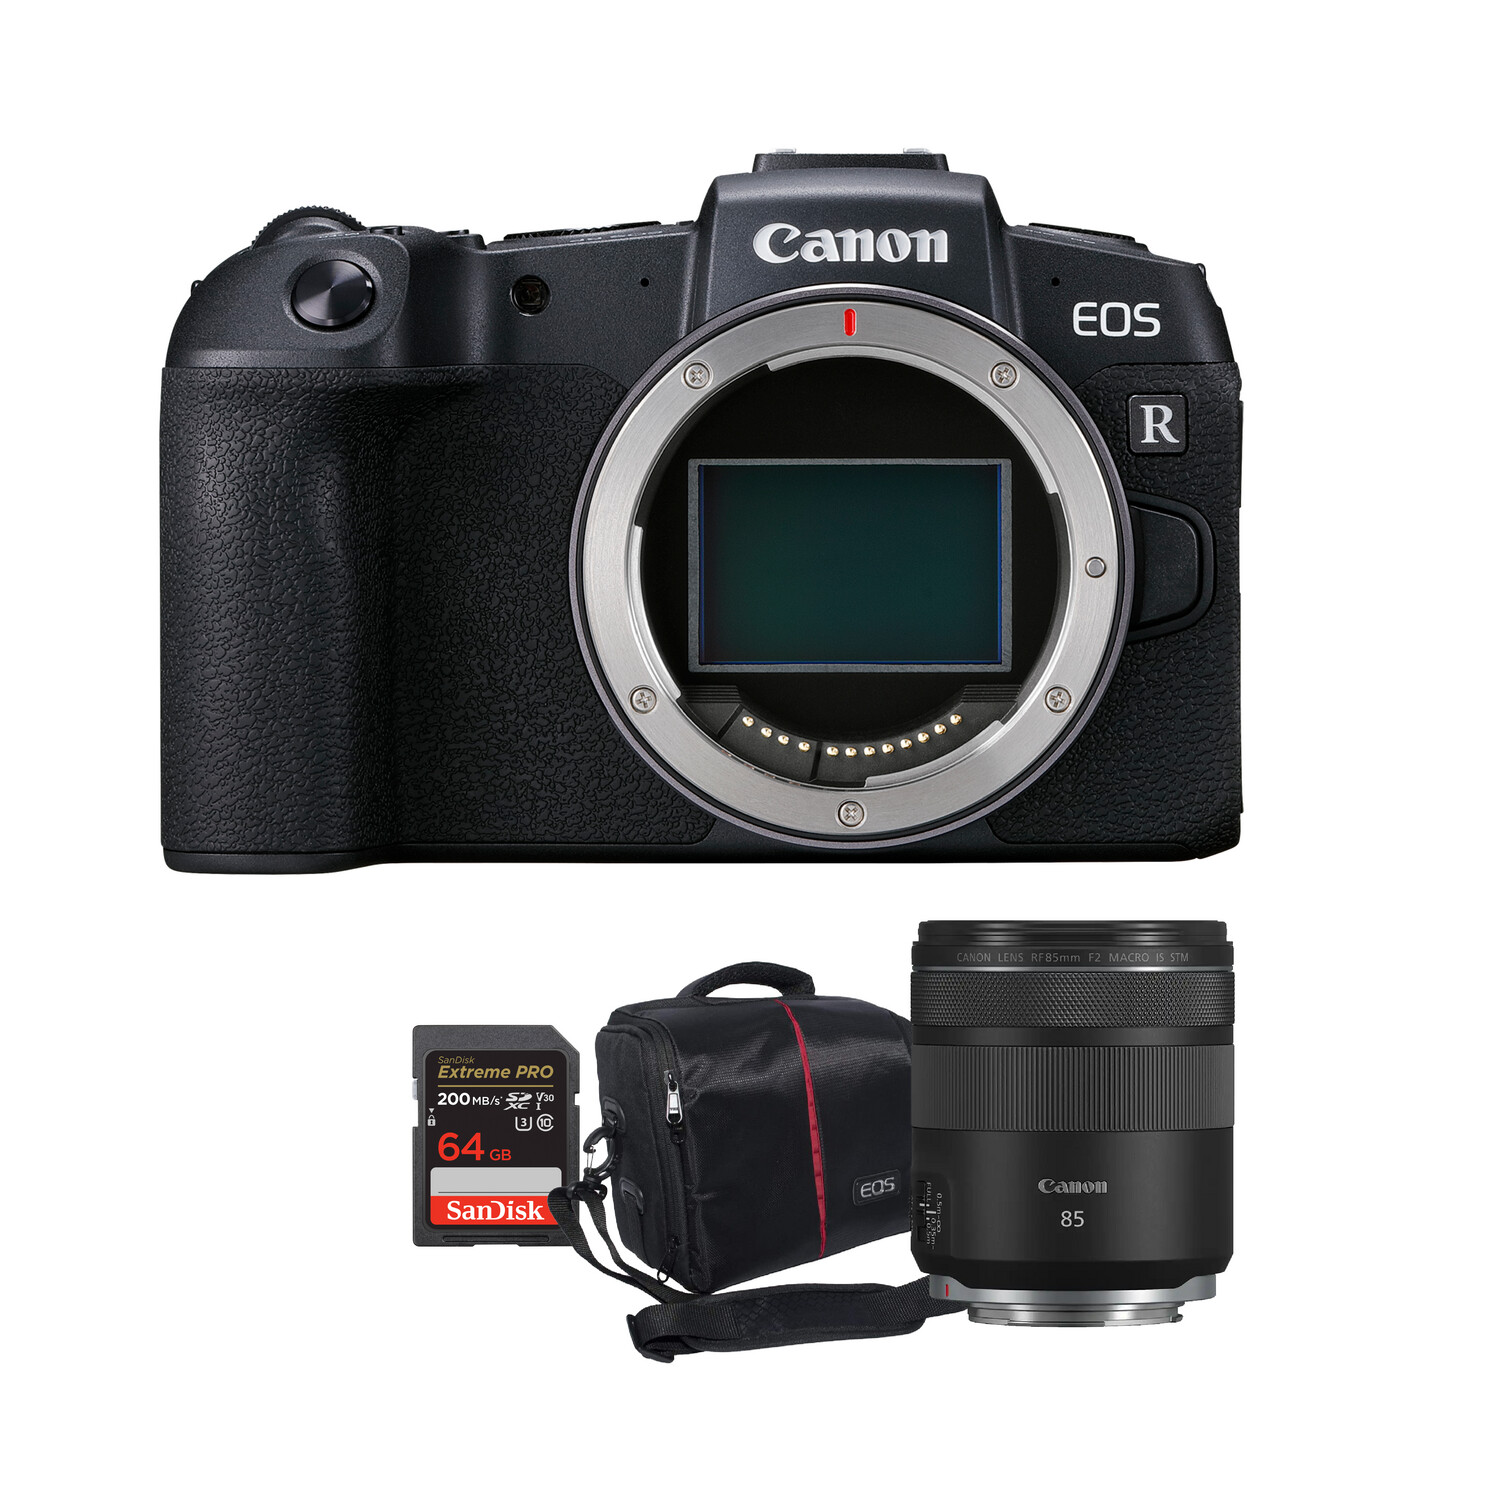 Canon EOS RP Mirrorless Camera Body with RF 85mm f/2 Macro IS STM Lens + Sandisk 64GB Extreme Pro SD Card + Camera bag